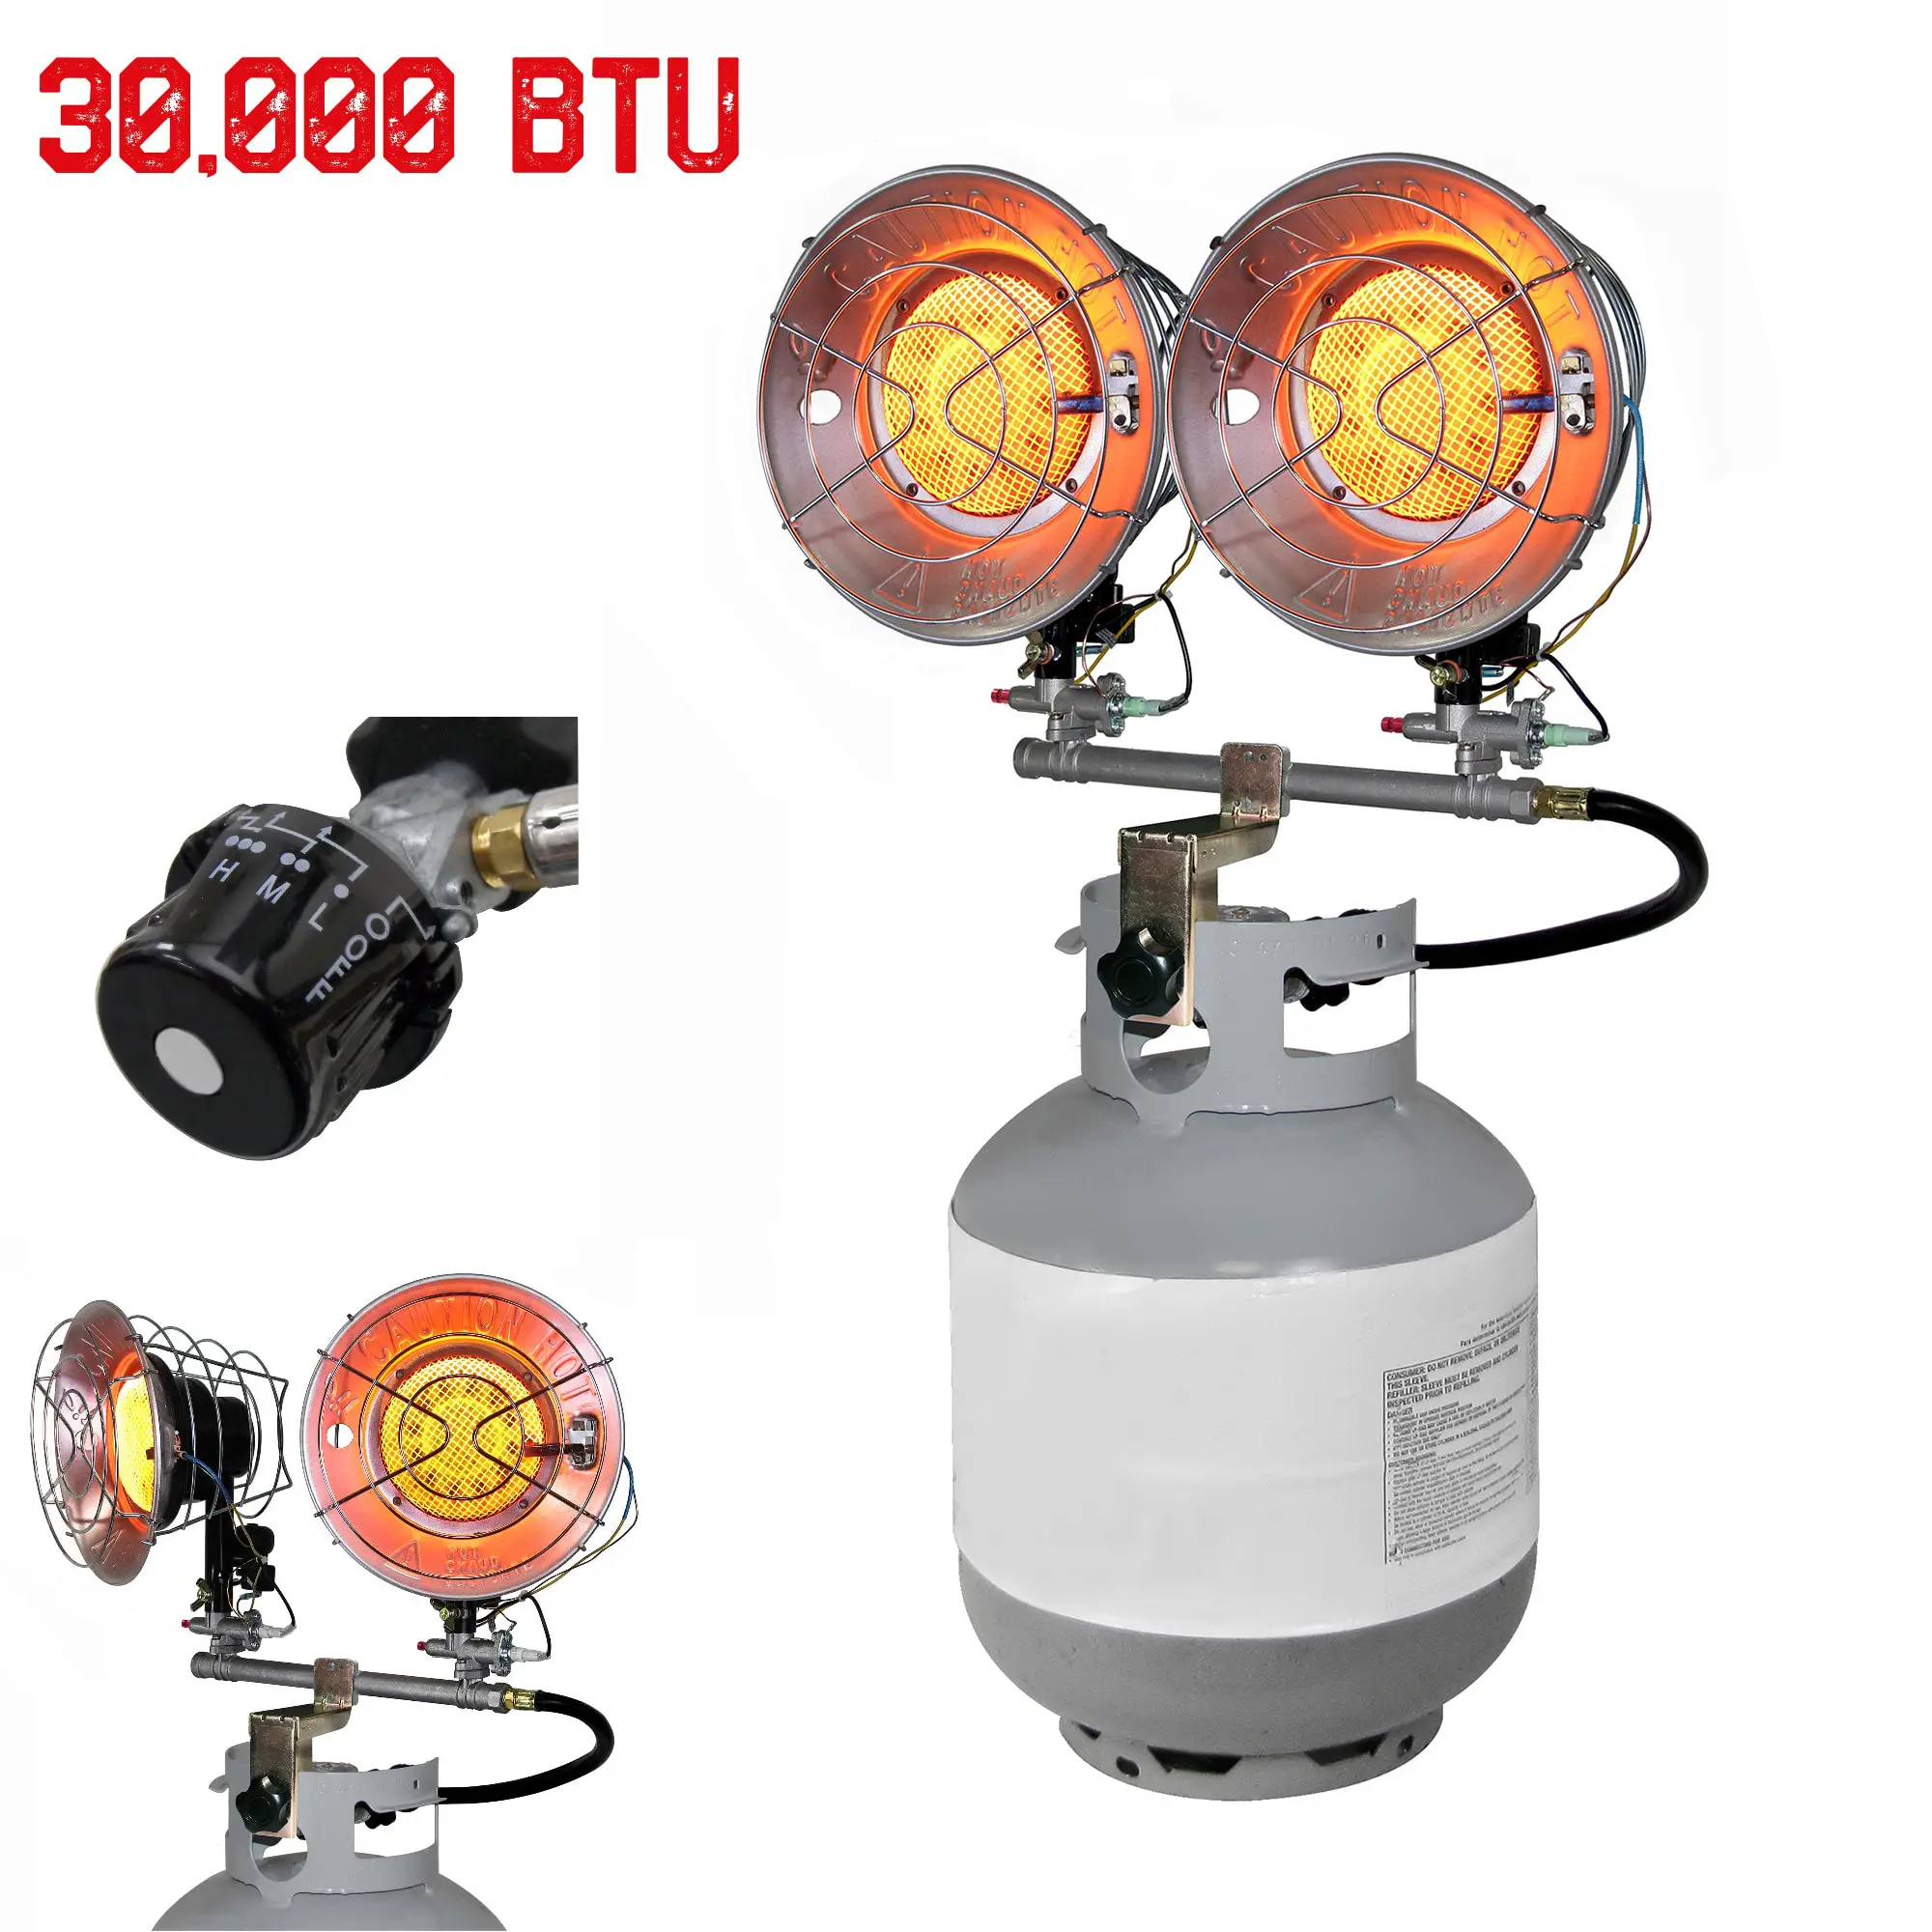 How Much BTU Does A Propane Heater Use (10000, 20000, 30000)